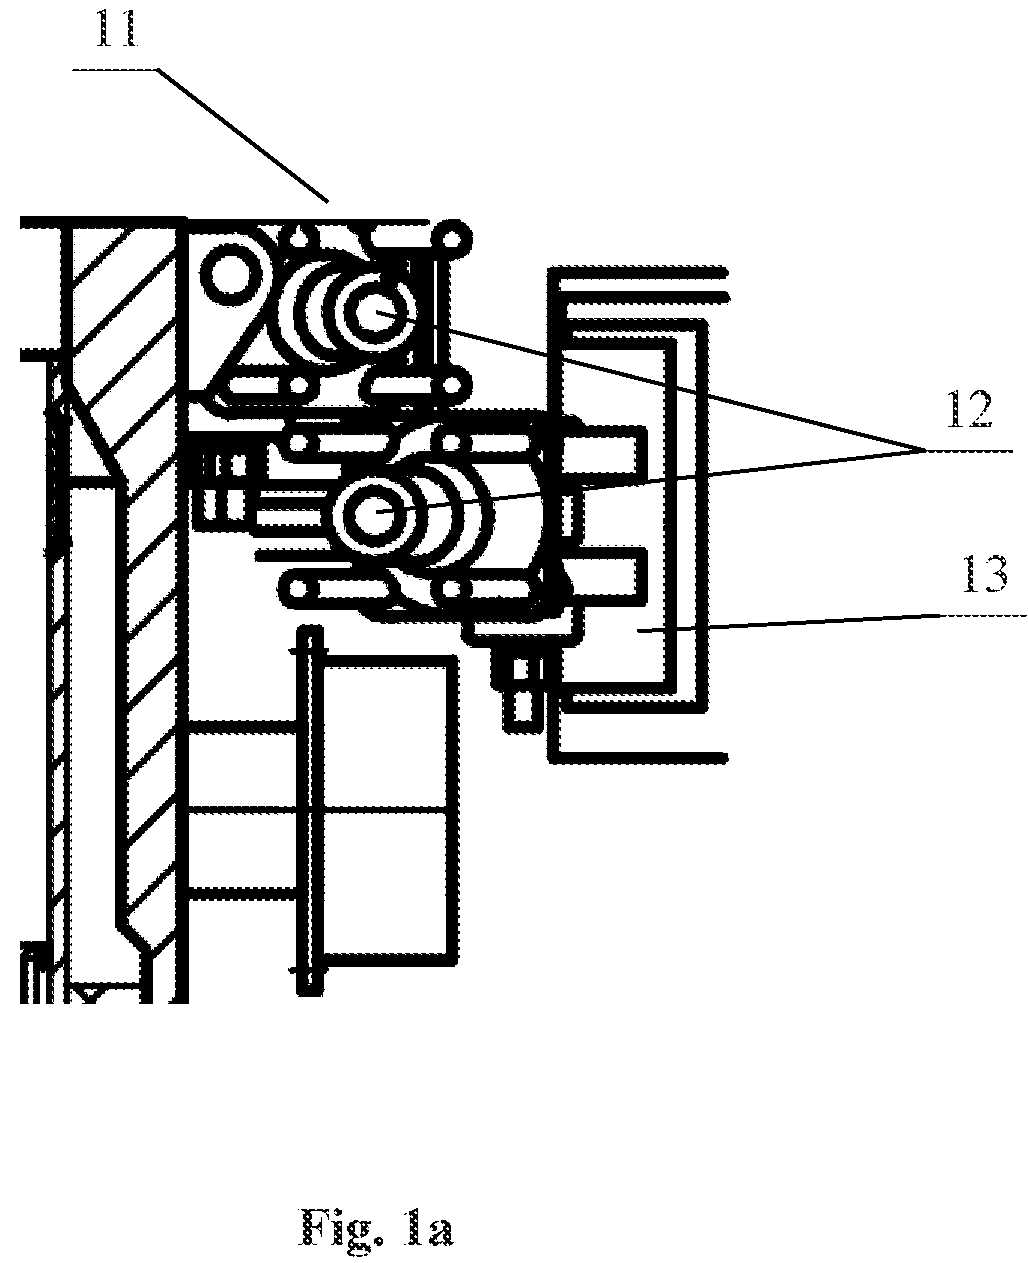 Device for confining nuclear reactor core melt